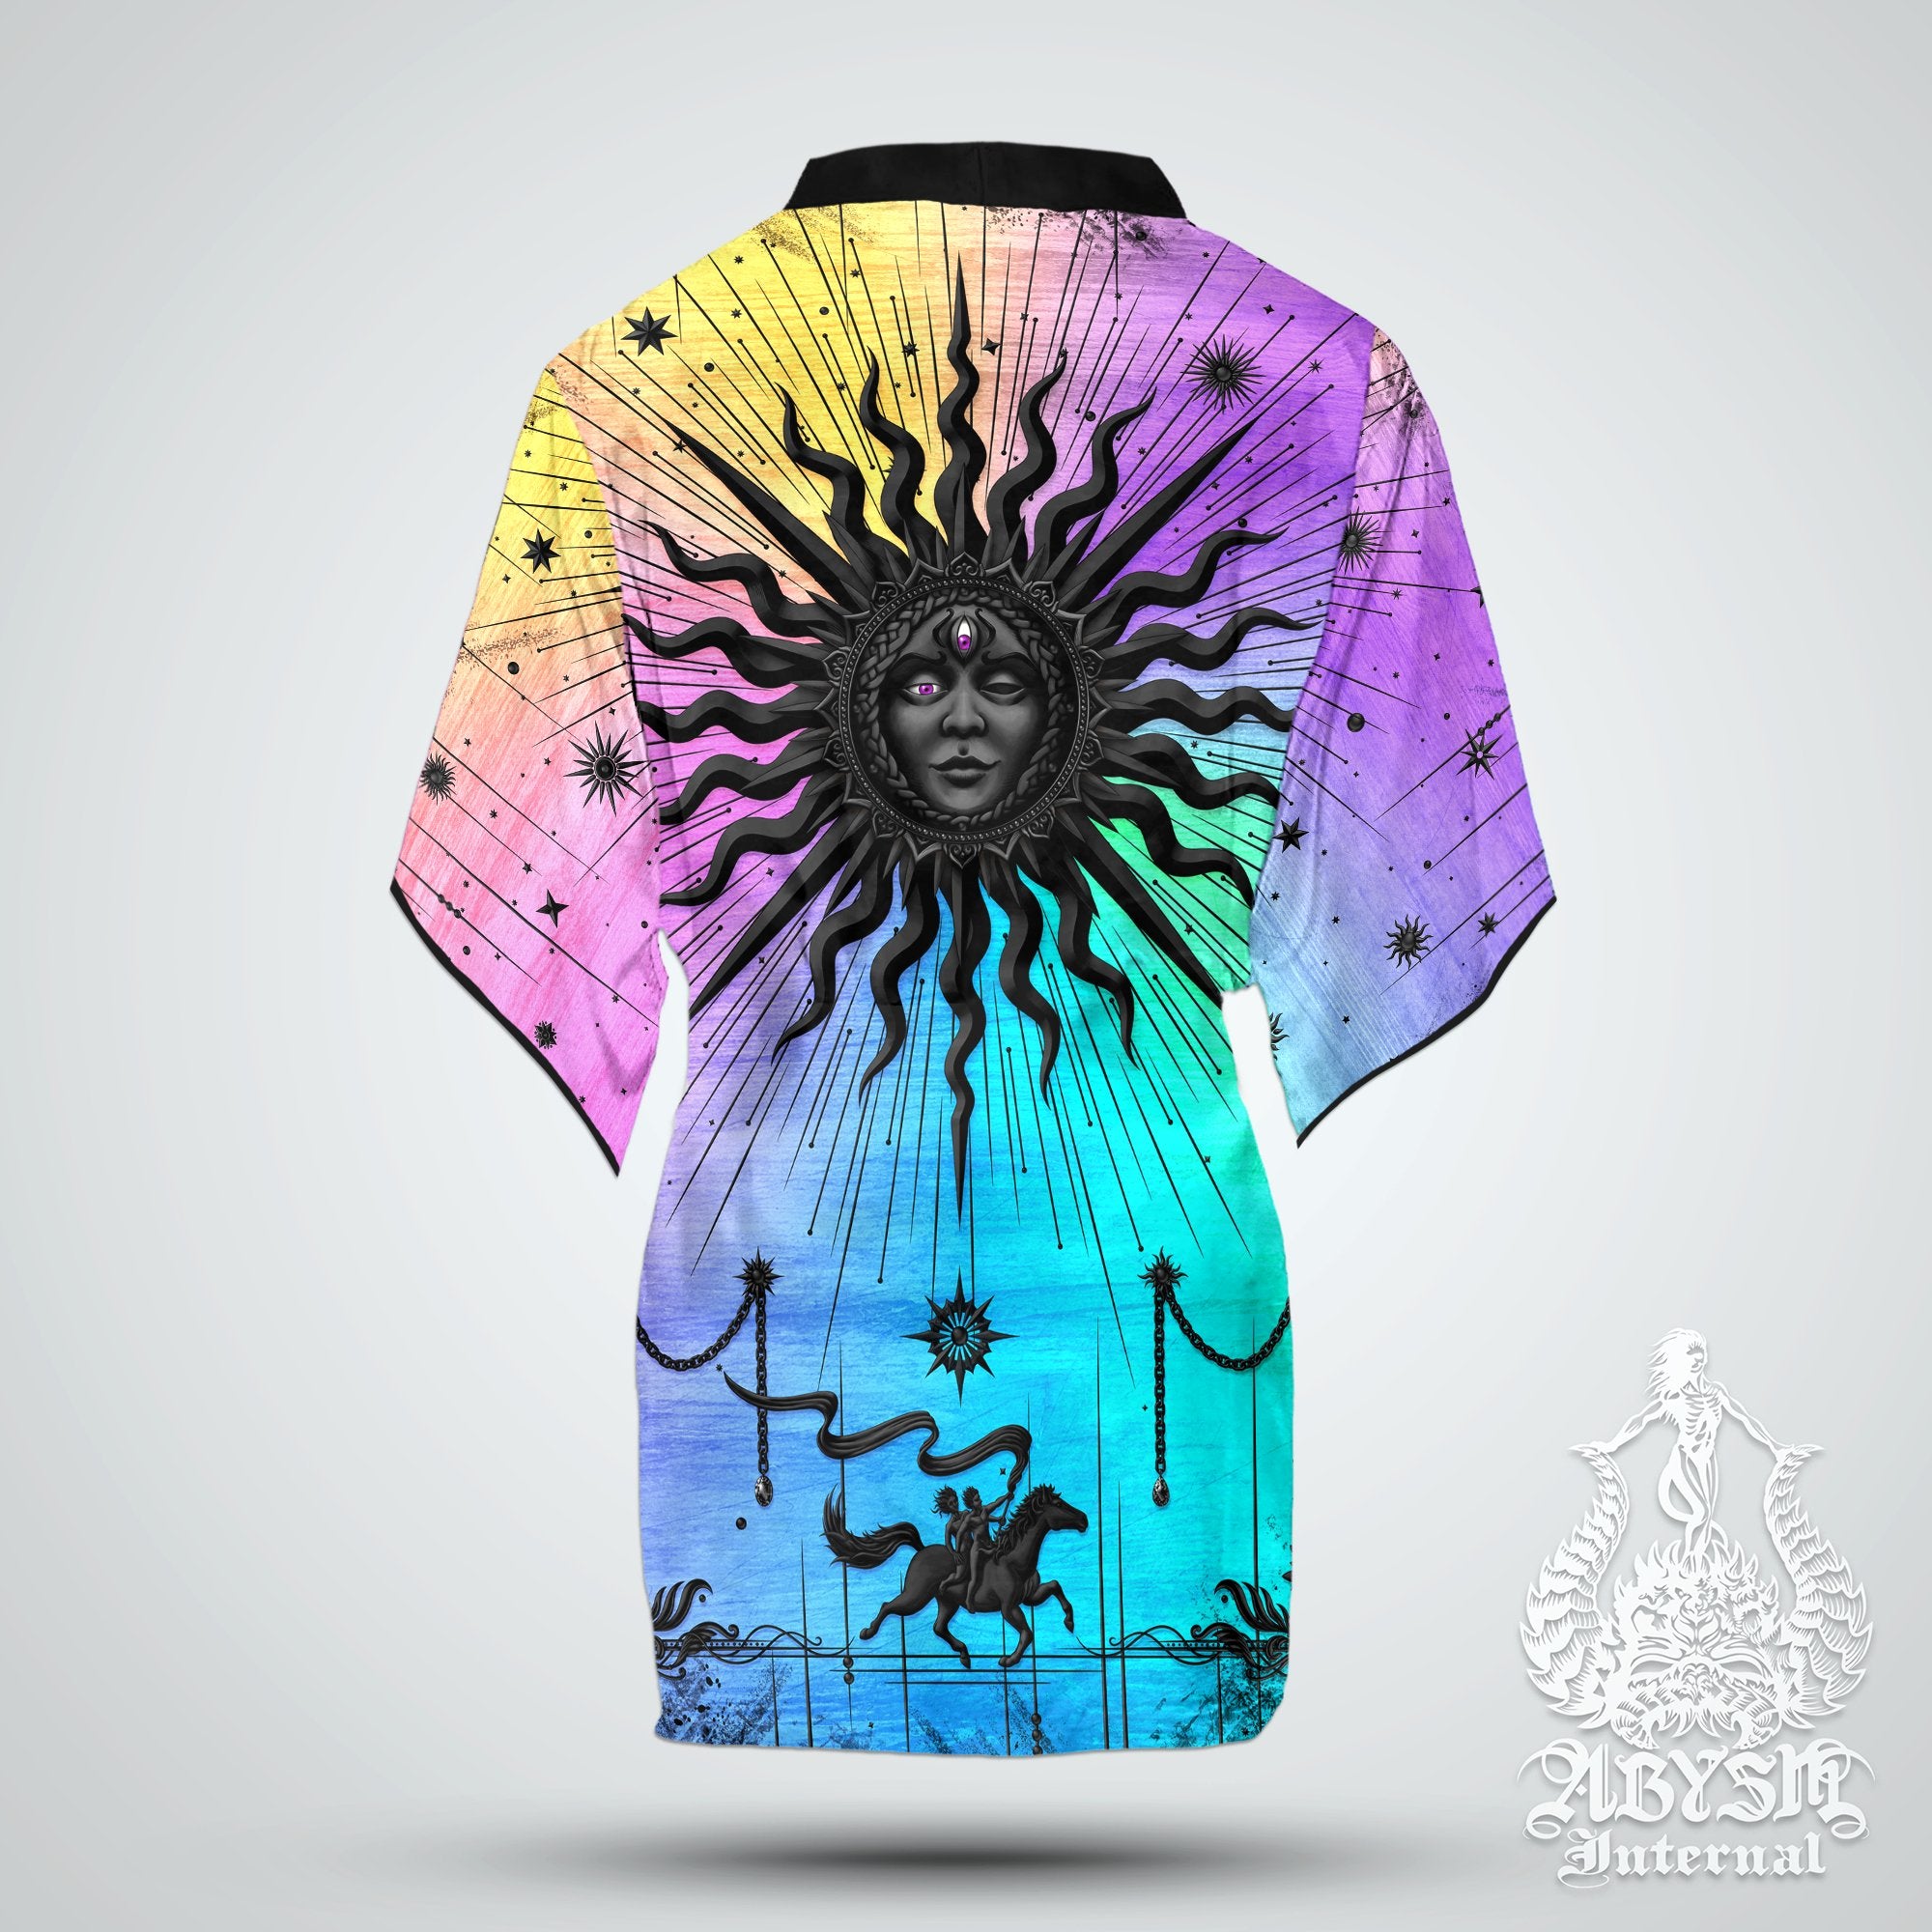 Psychedelic Sun Short Kimono Robe, Pastel Black, Trippy Beach Party Outfit, Tarot Arcana Coverup, Indie Summer Festival Clothing, Unisex - Abysm Internal